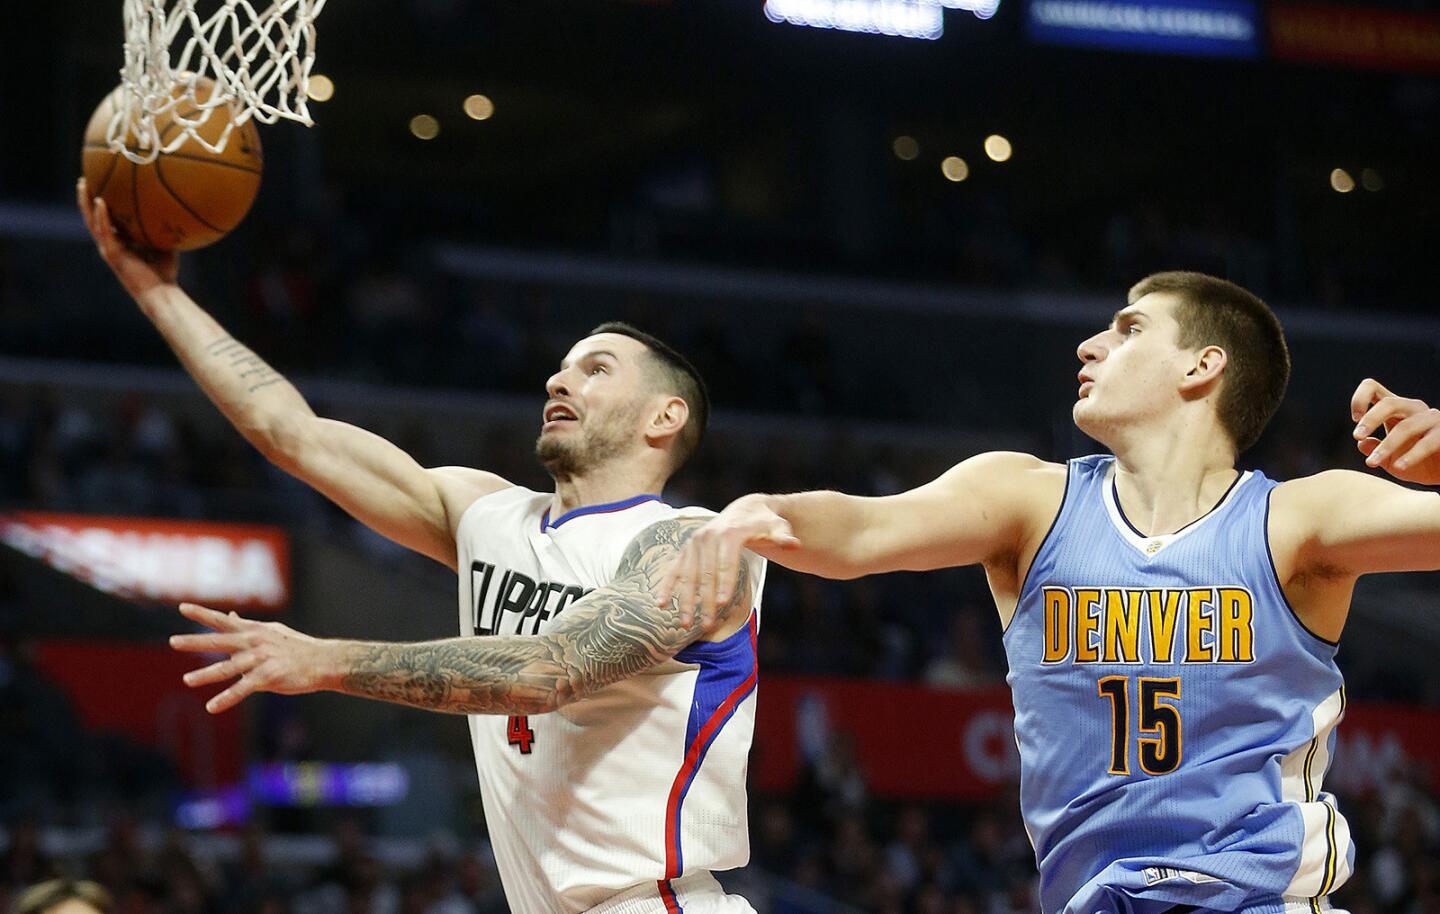 Clippers guard J.J. Redick (4) drives to the basket while being defended by Denver Nuggets forward Nikola Jokic (15) in the second quarter at Staples Center.